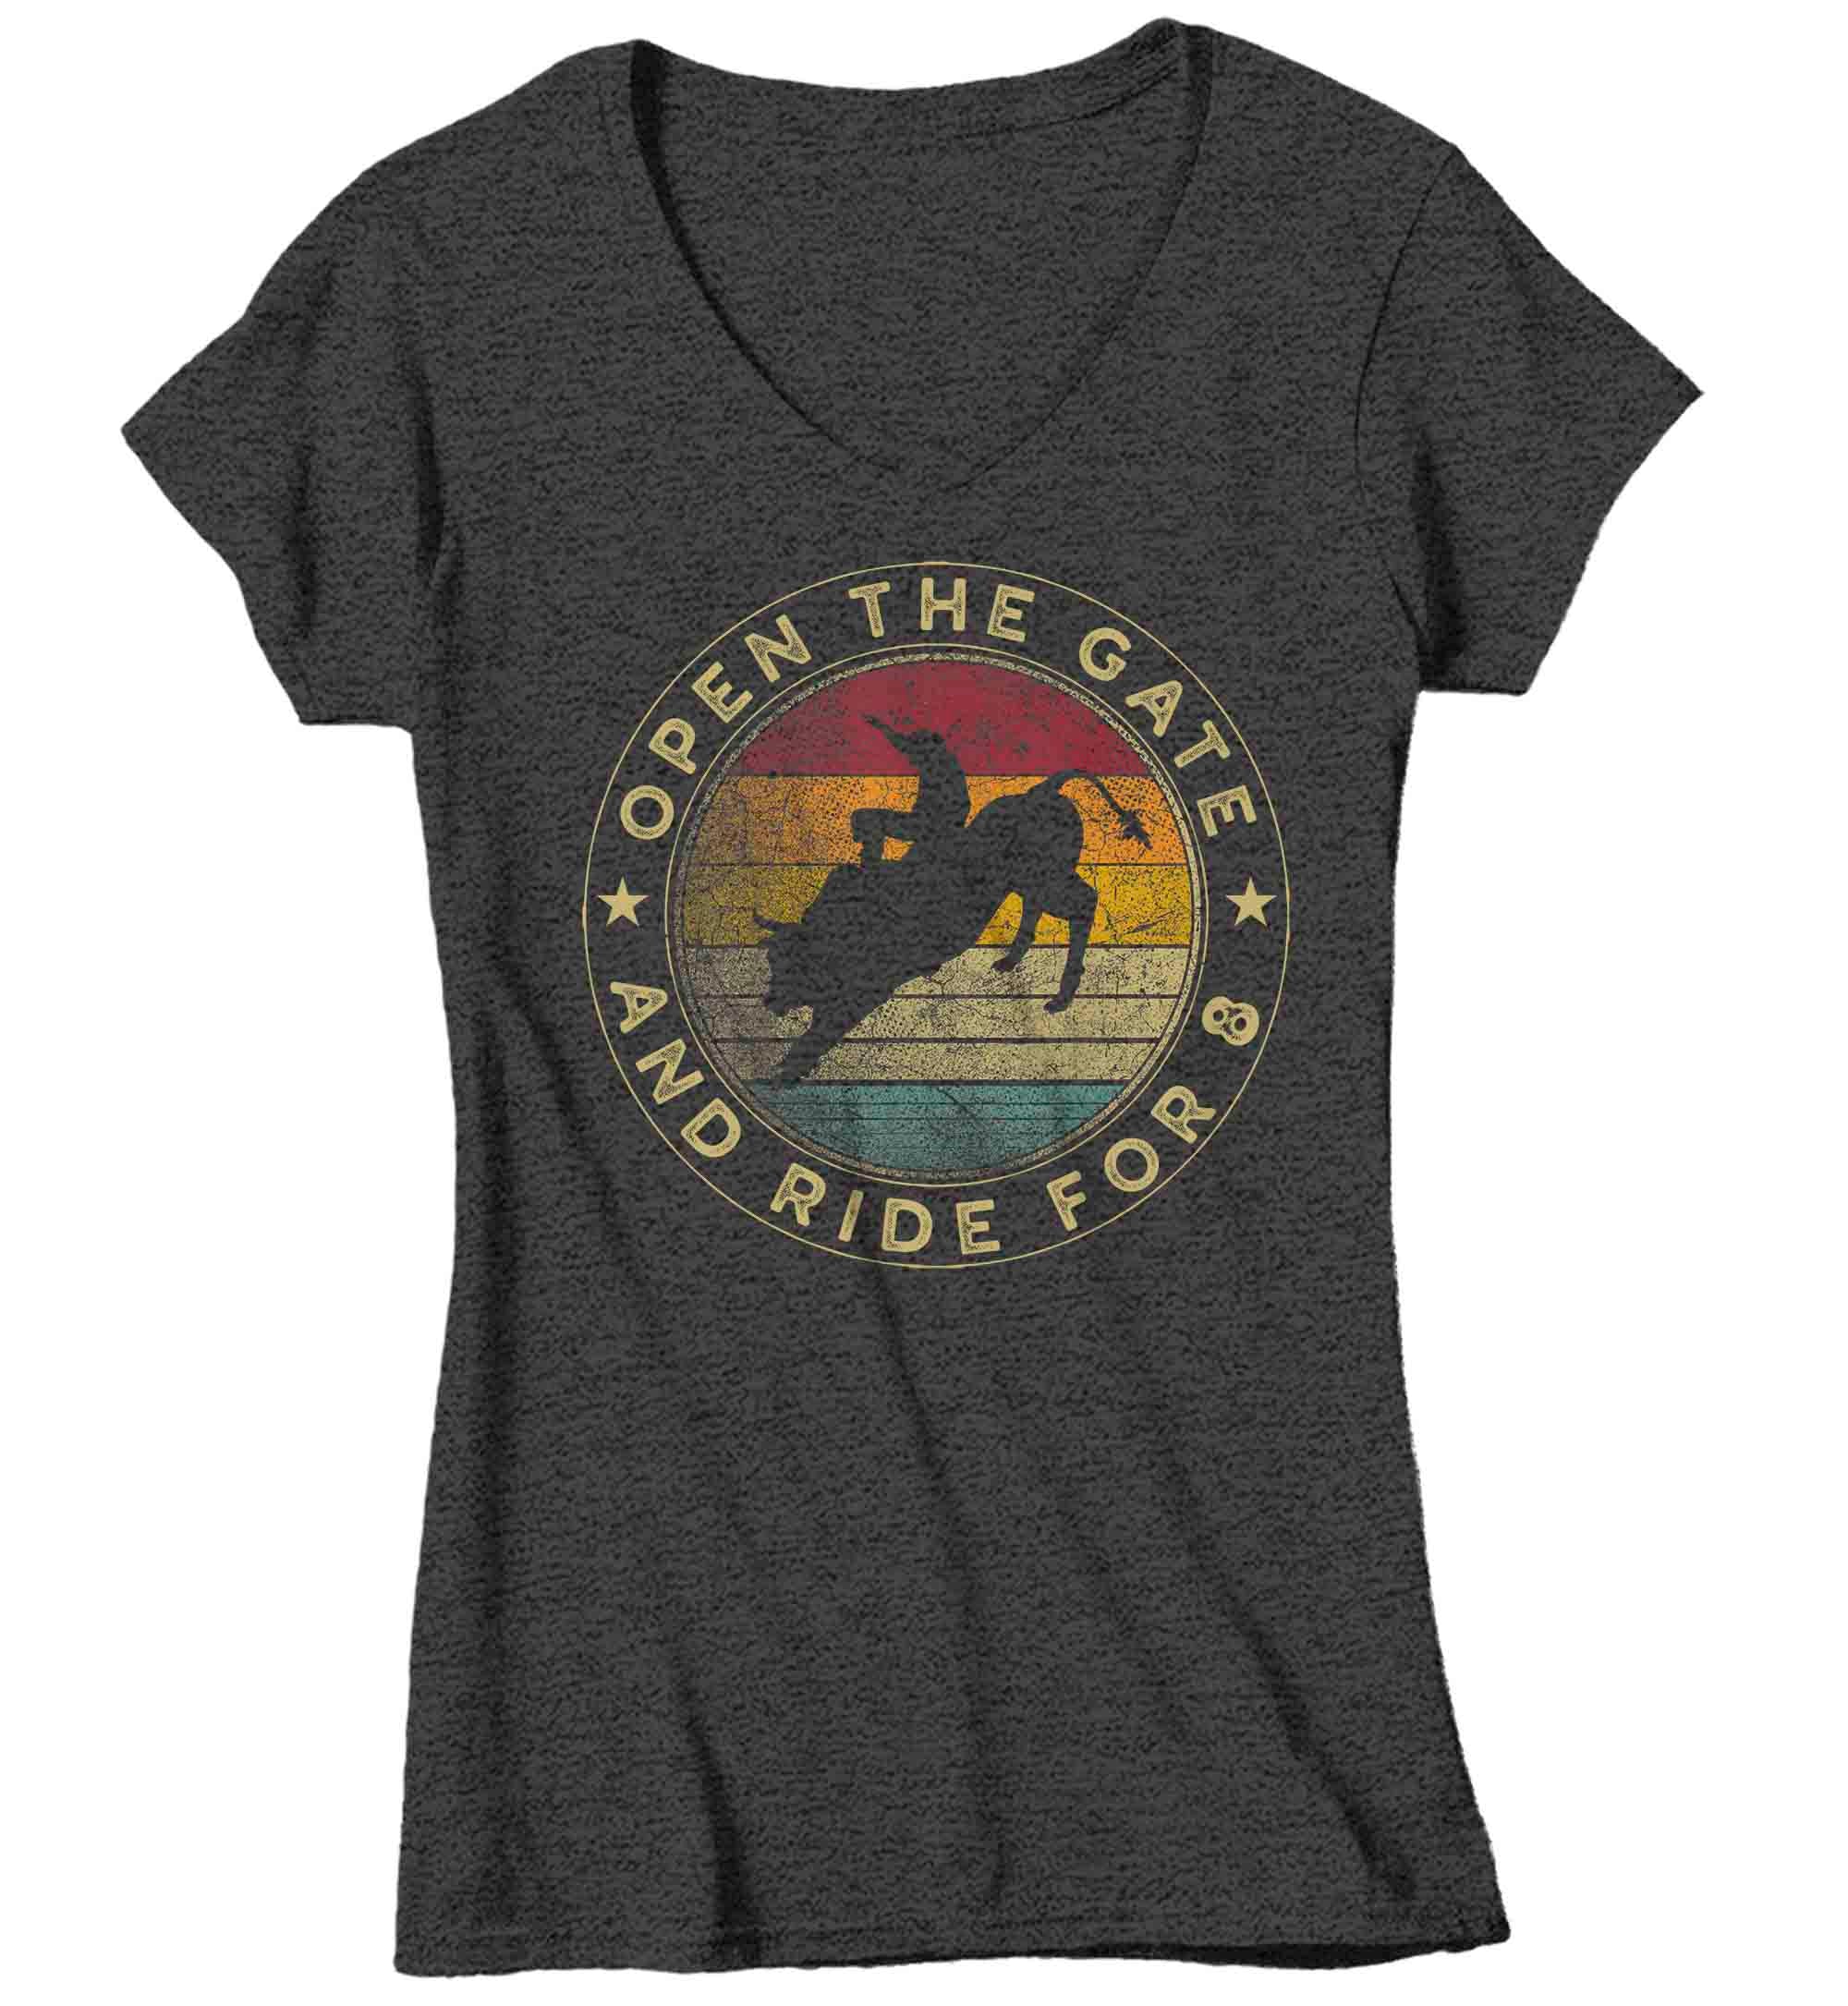 Women's V-Neck Rodeo T Shirt Open The Gate Shirts Ride For 8